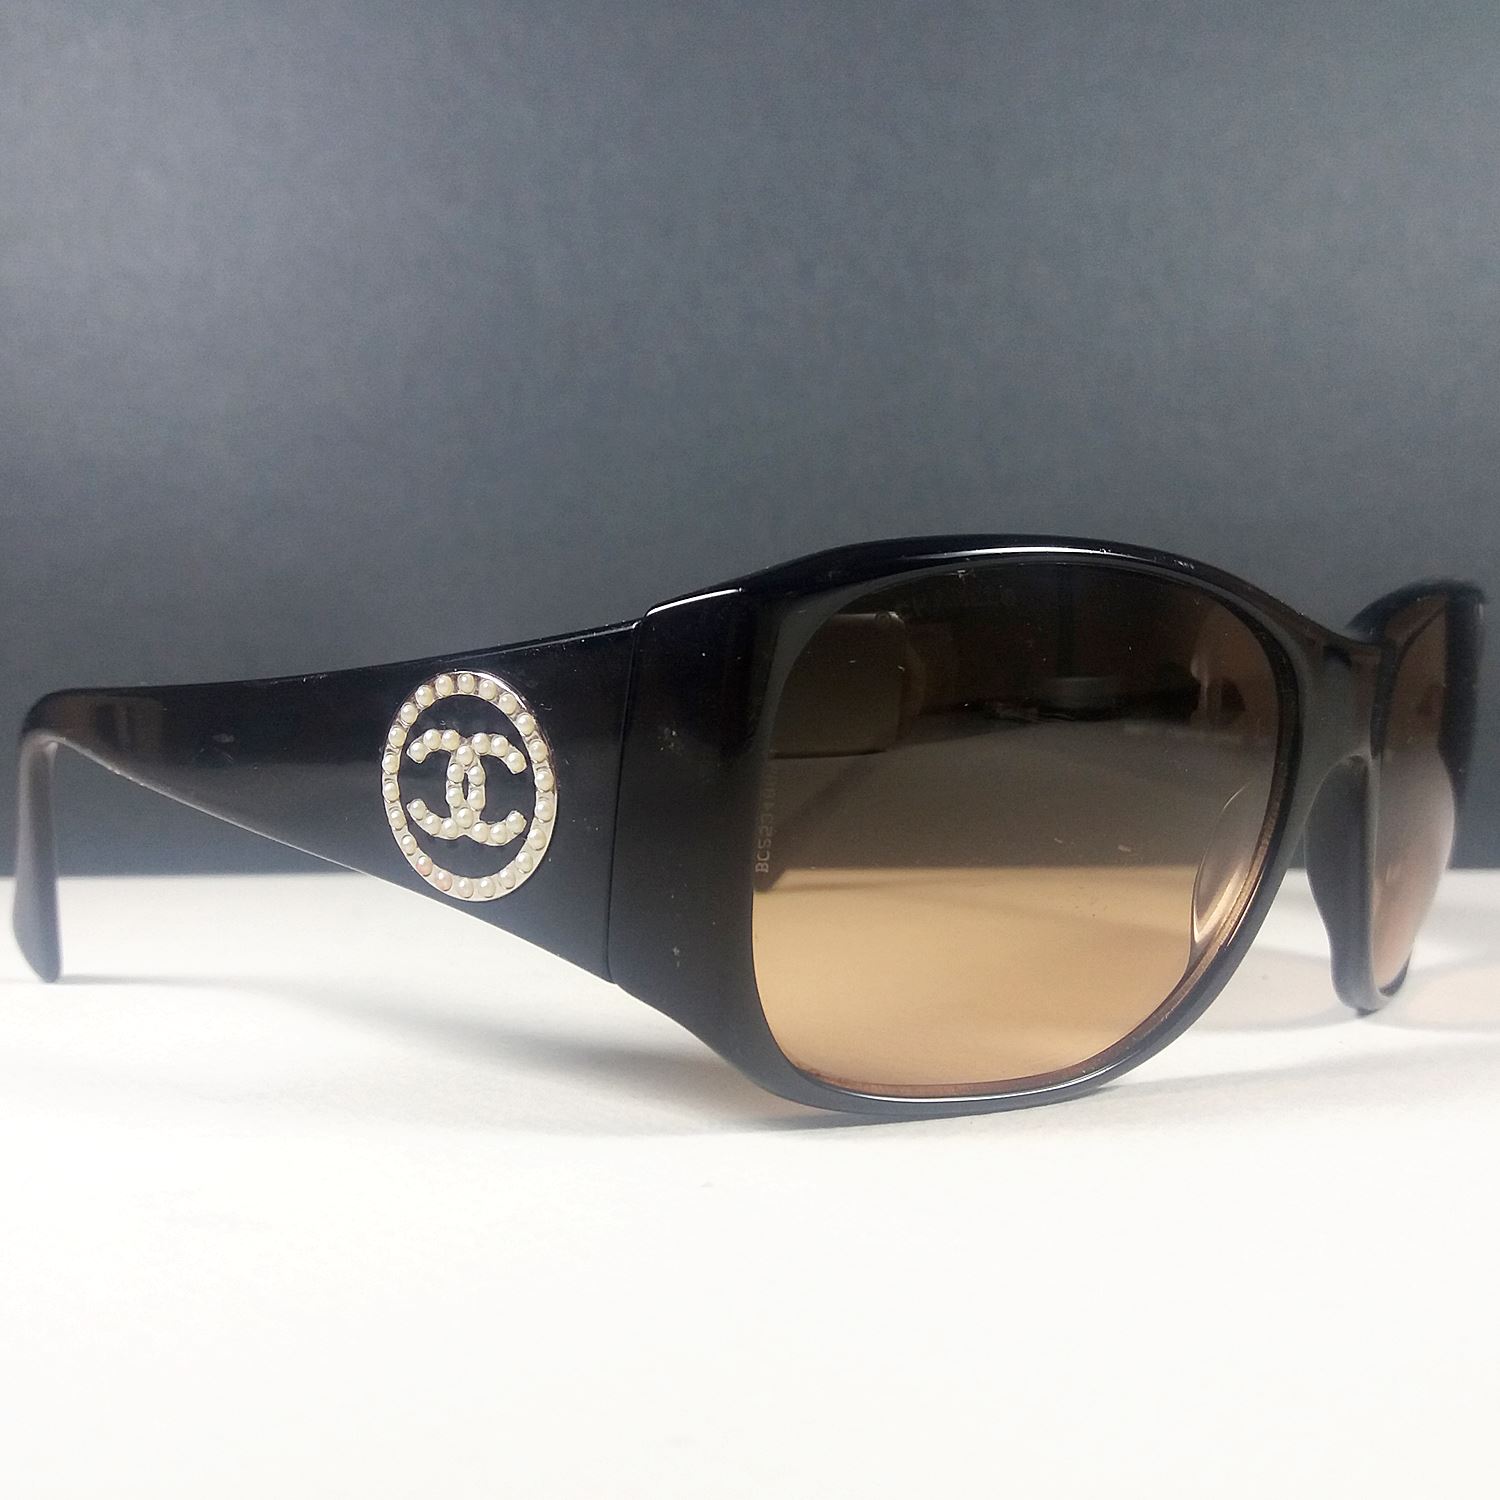 CHANEL, Accessories, Chanelblack With Crystals 588b C 508g 120 Wrap Style  Sunglasses